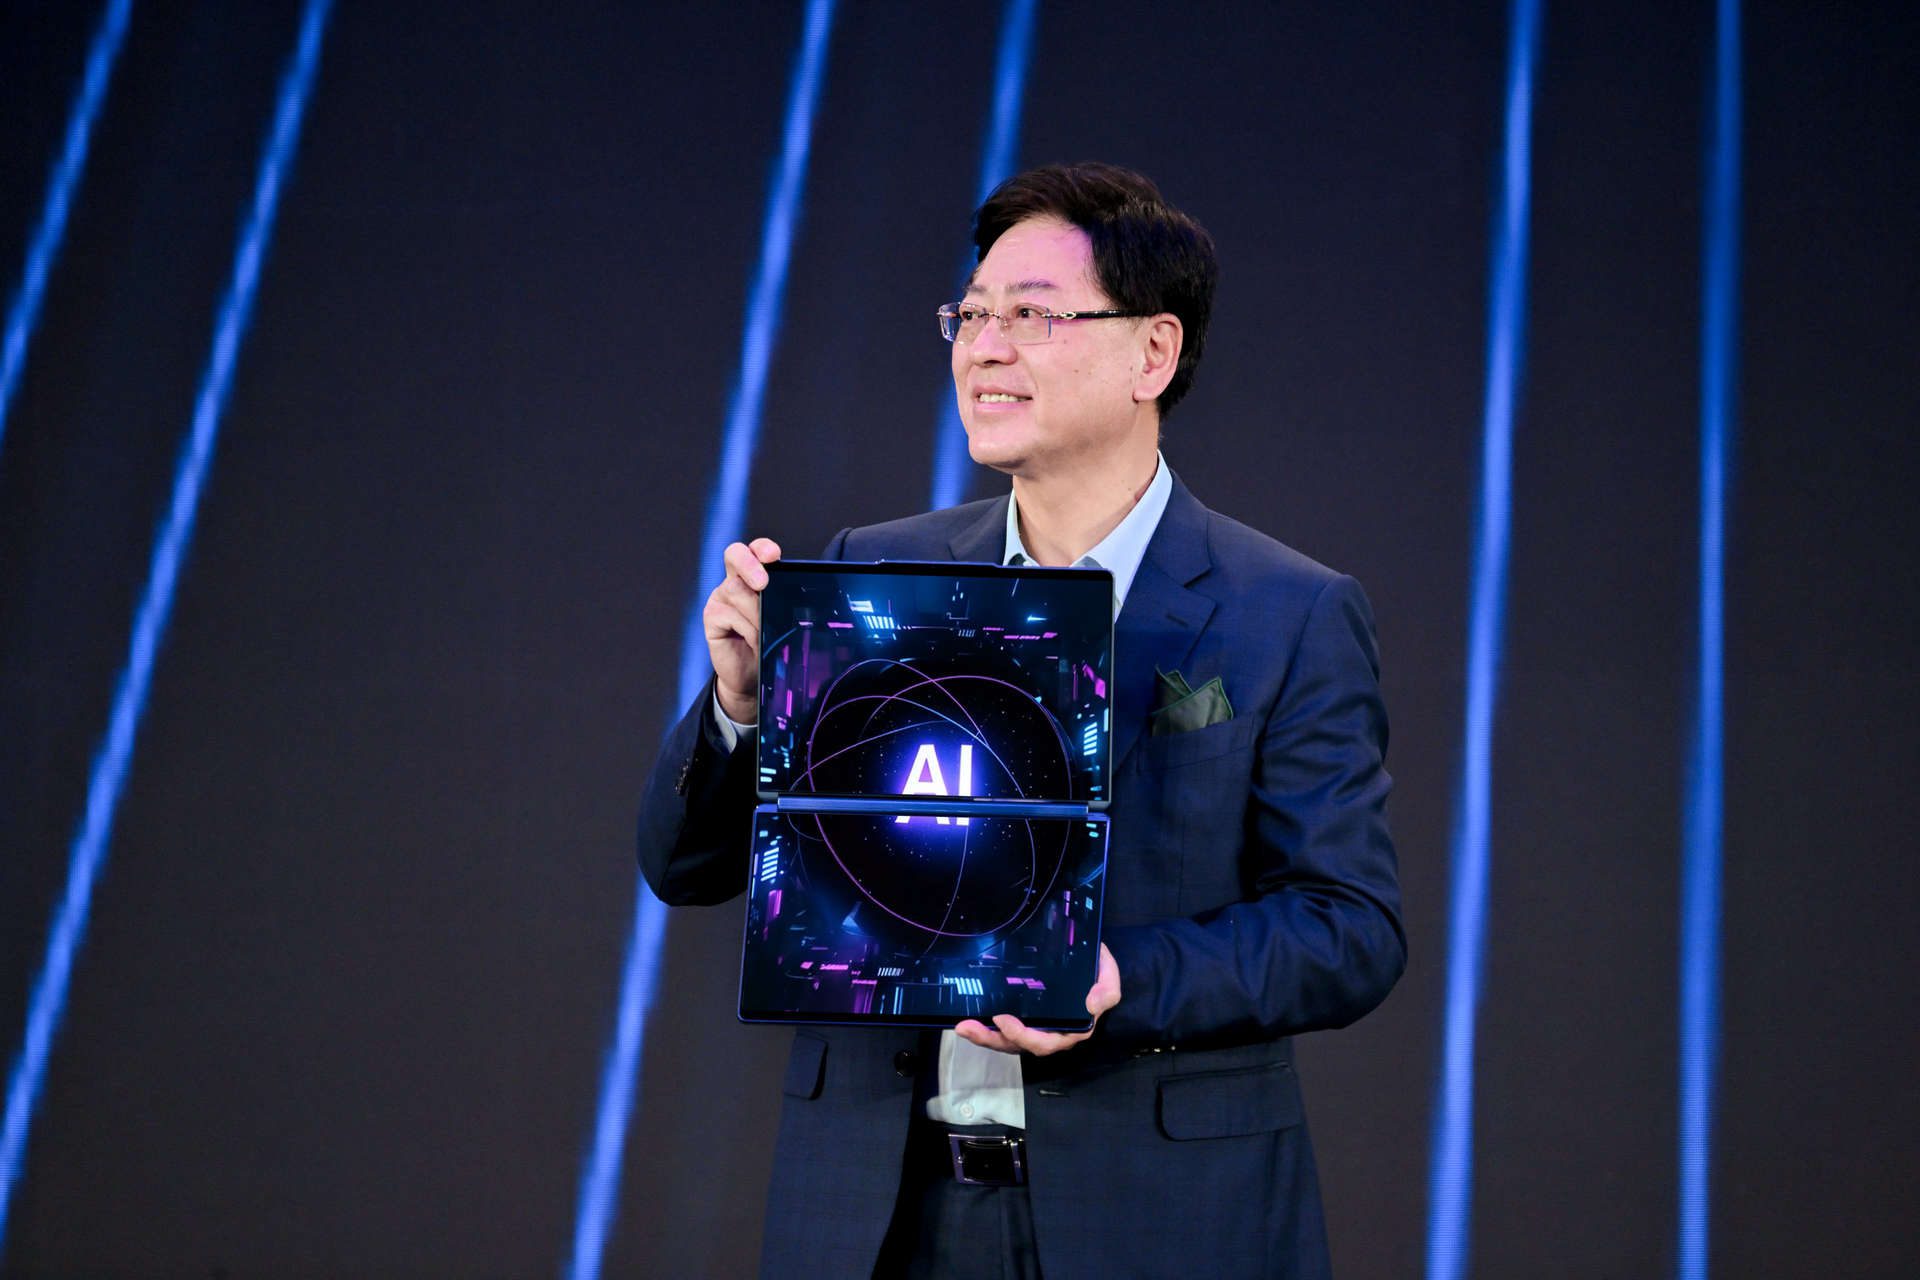 Yuanqing Yang on stage at at Tech World Shanghai holding a dual-screen laptop